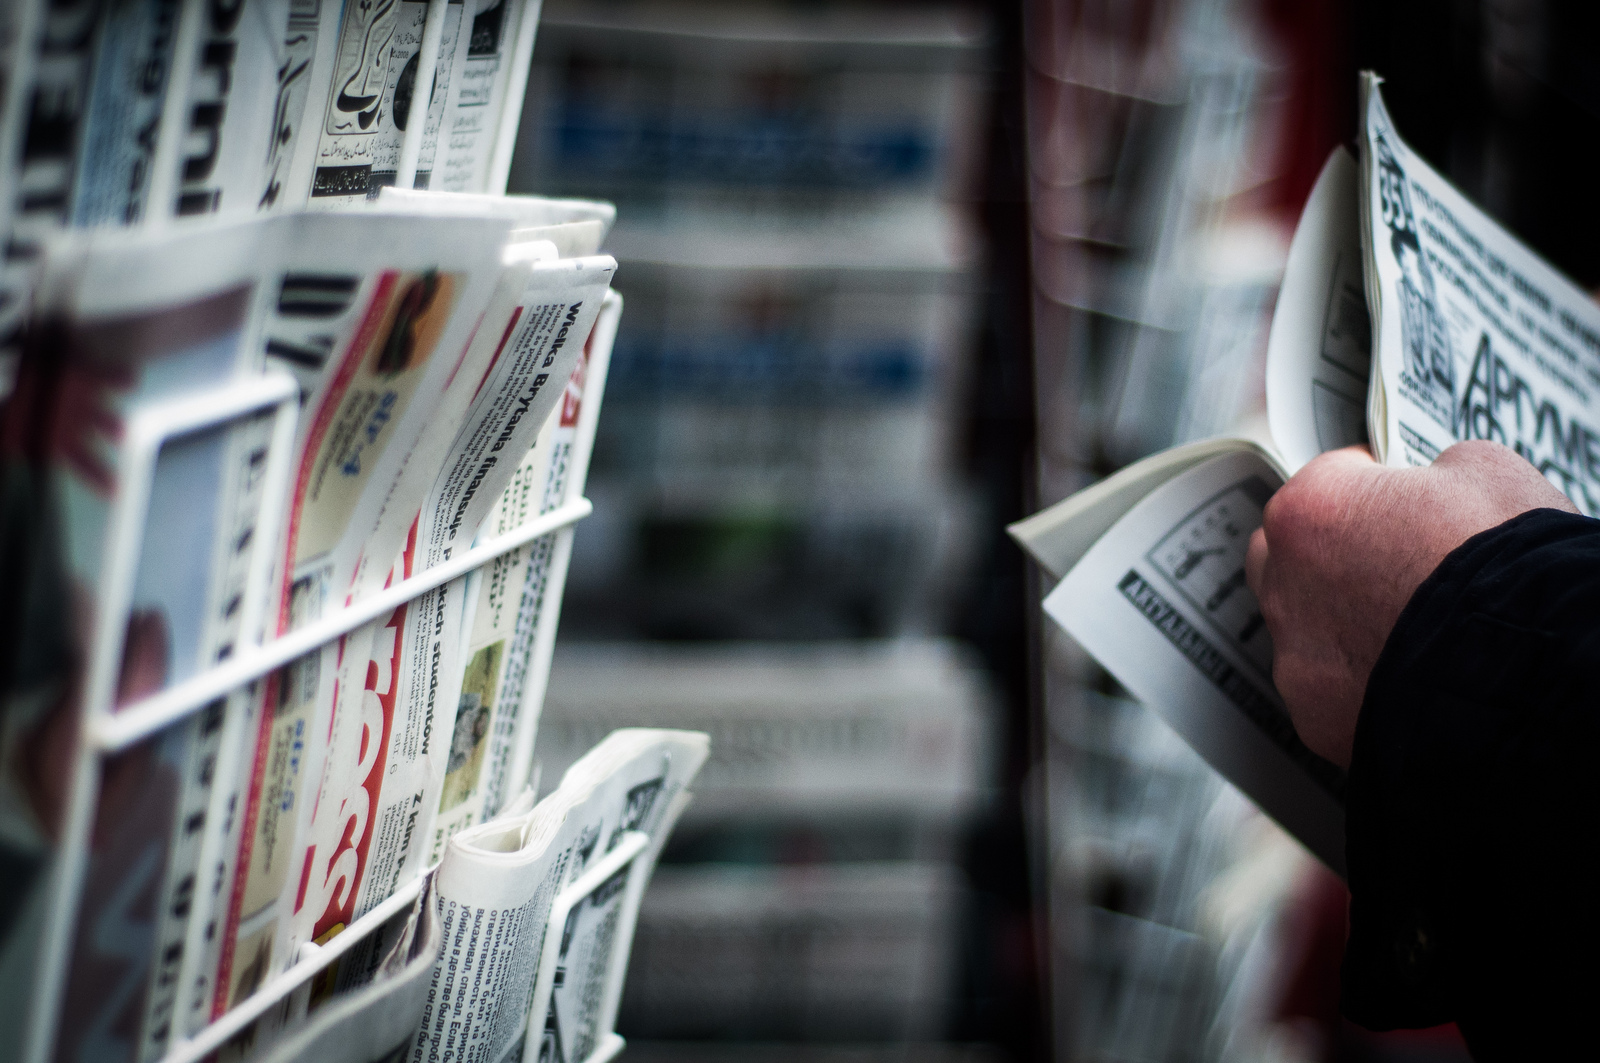 Newspapers on newsstand. Photo: greenzowie/flickr